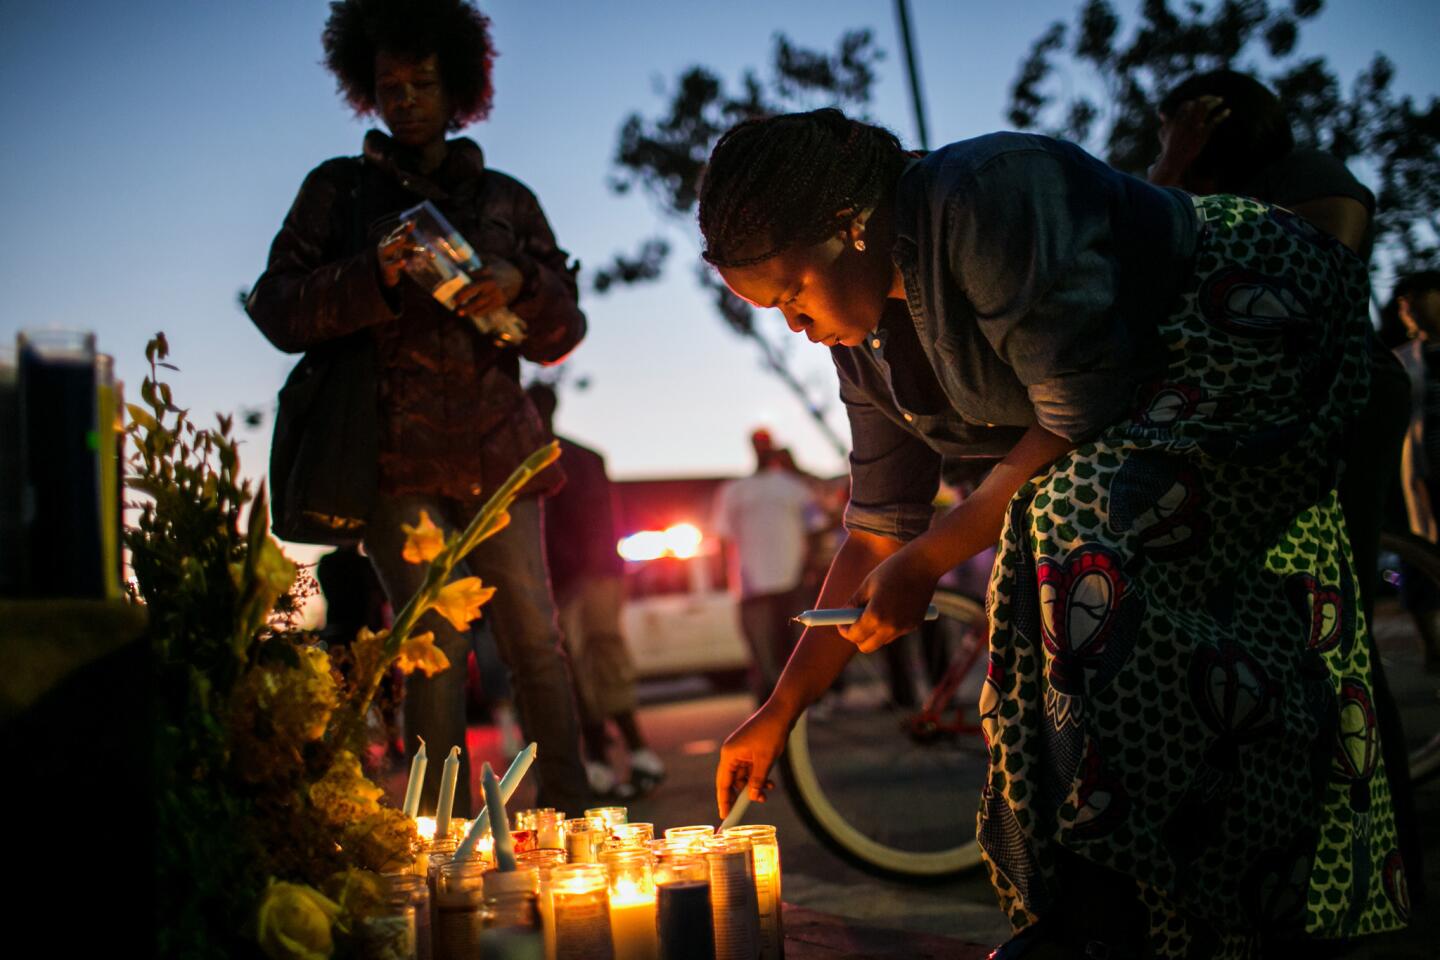 Family members and friends of Marcus McClendon, 52, light candles during a vigil at the site where he was shot and killed.